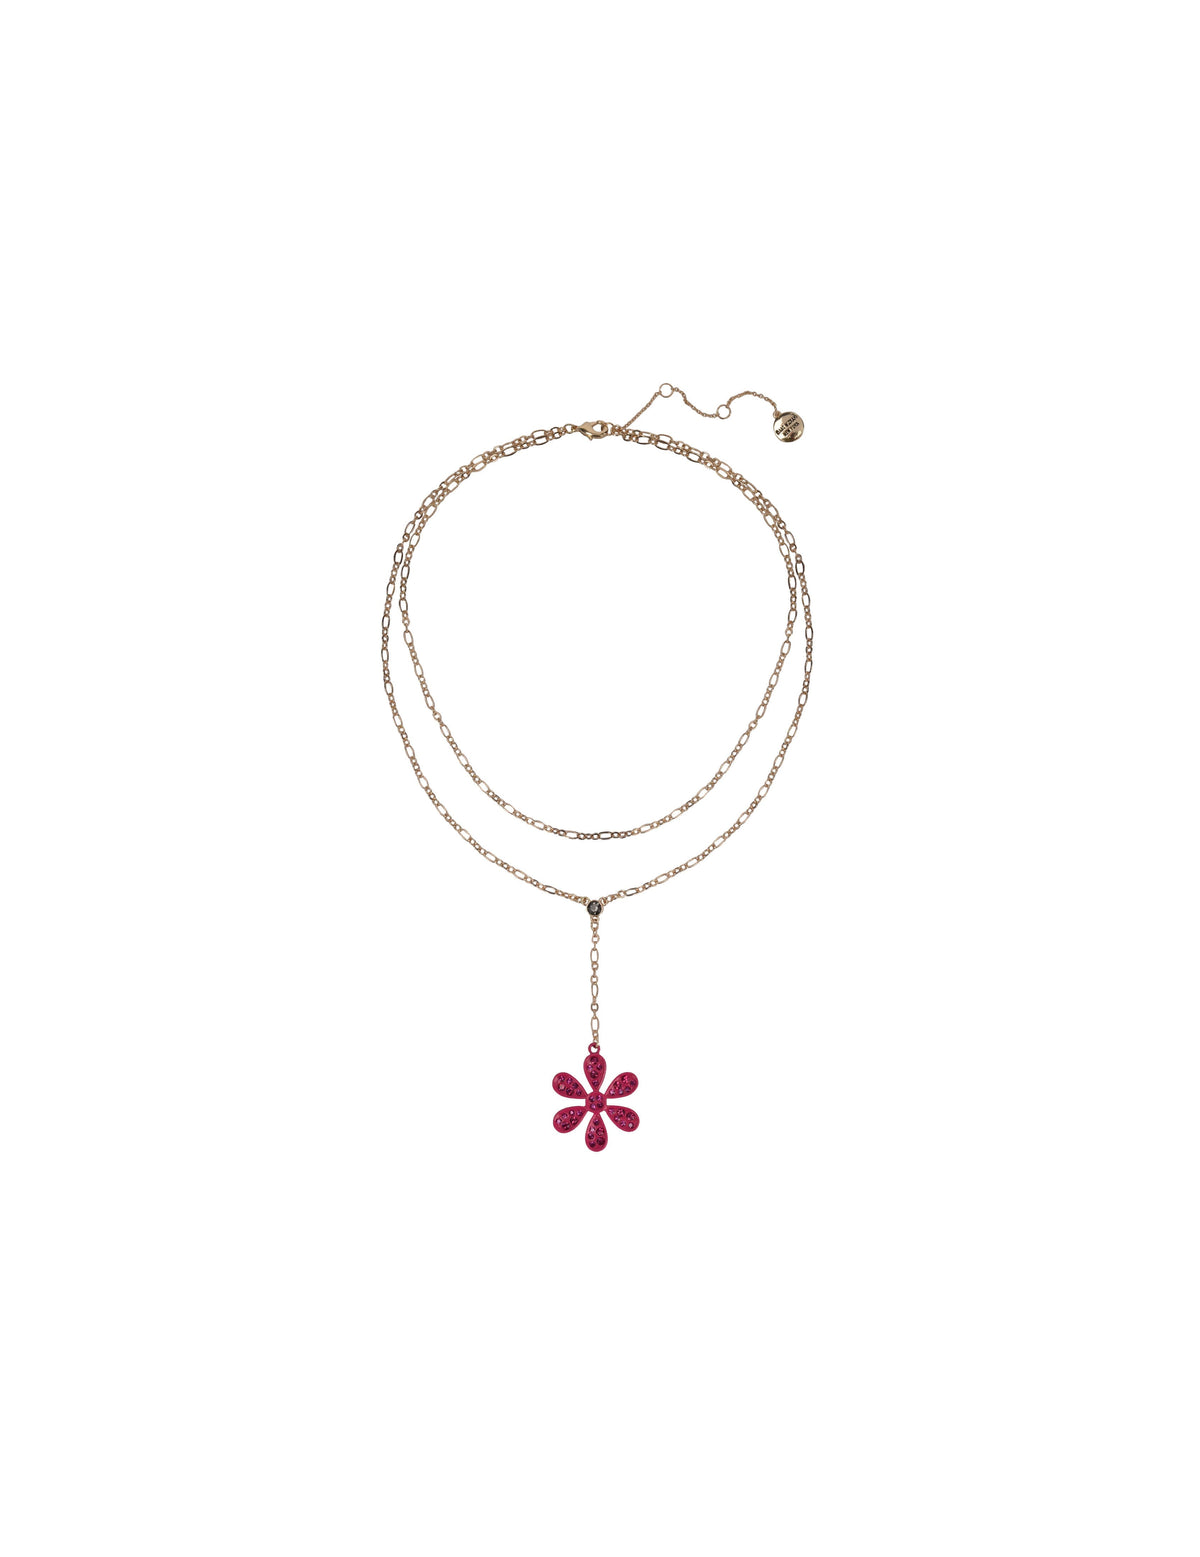 2 Row Gold Tone and Pink Flower Pendant Necklace